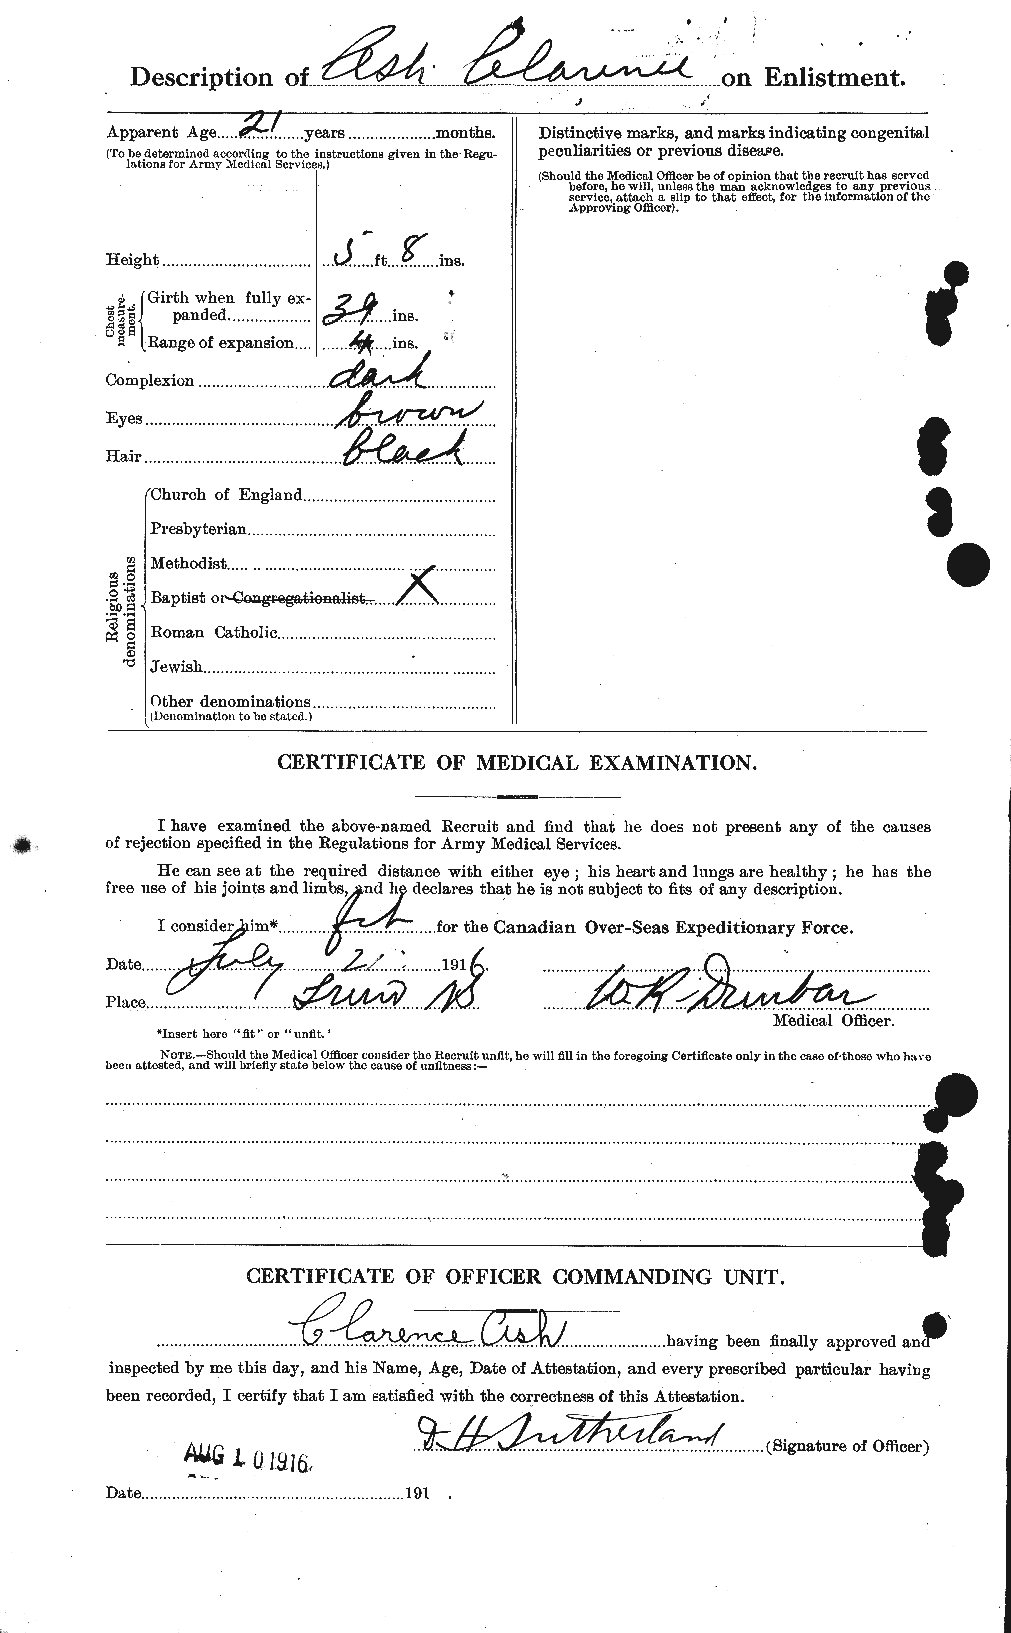 Personnel Records of the First World War - CEF 214644b